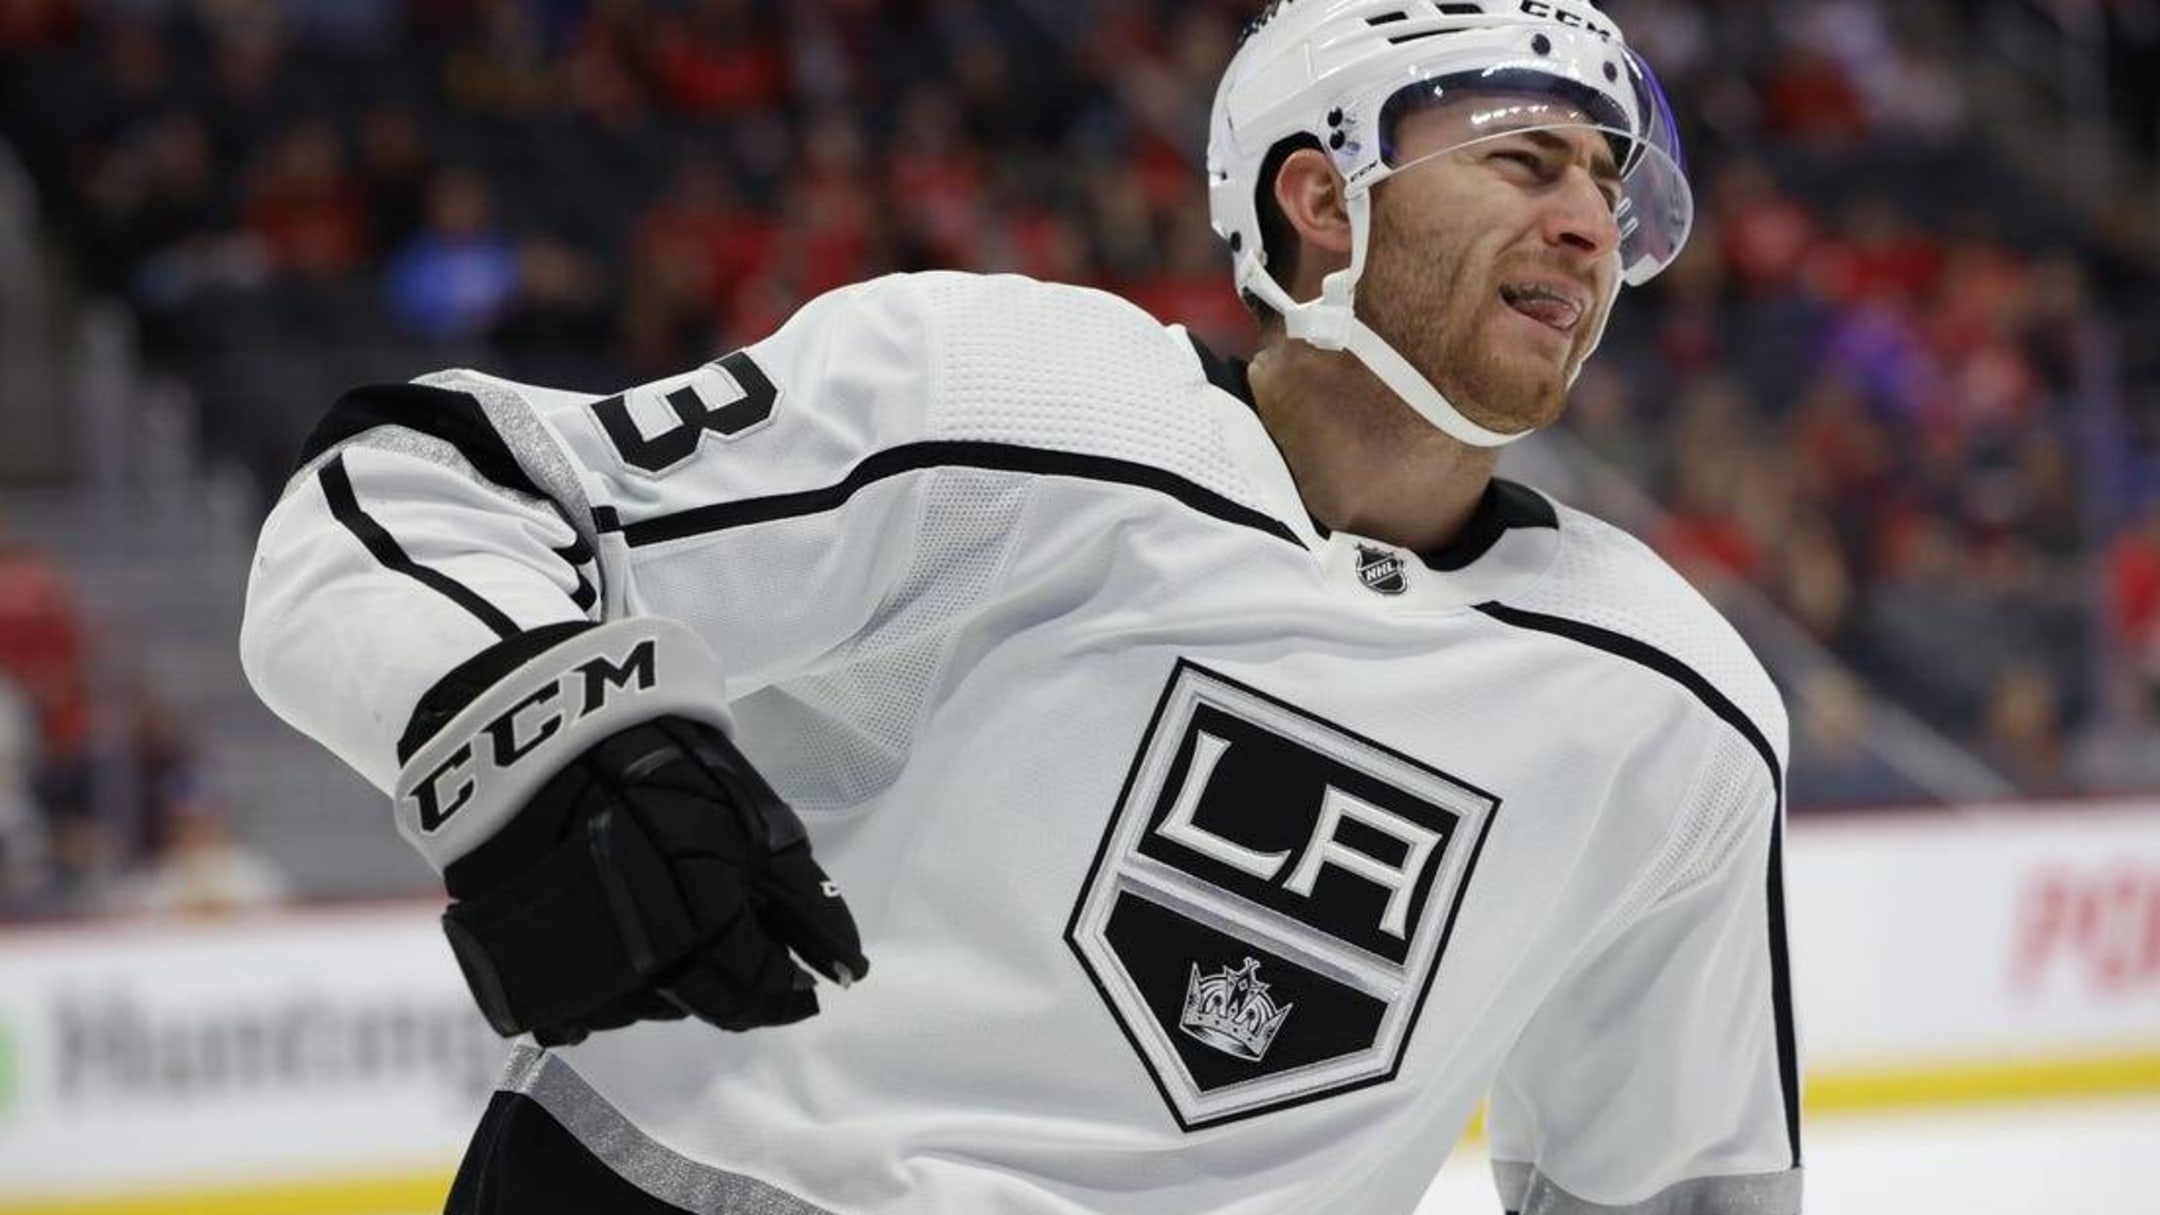 NHL 2015: New Third for Bolts, Kings Go Yellow – SportsLogos.Net News